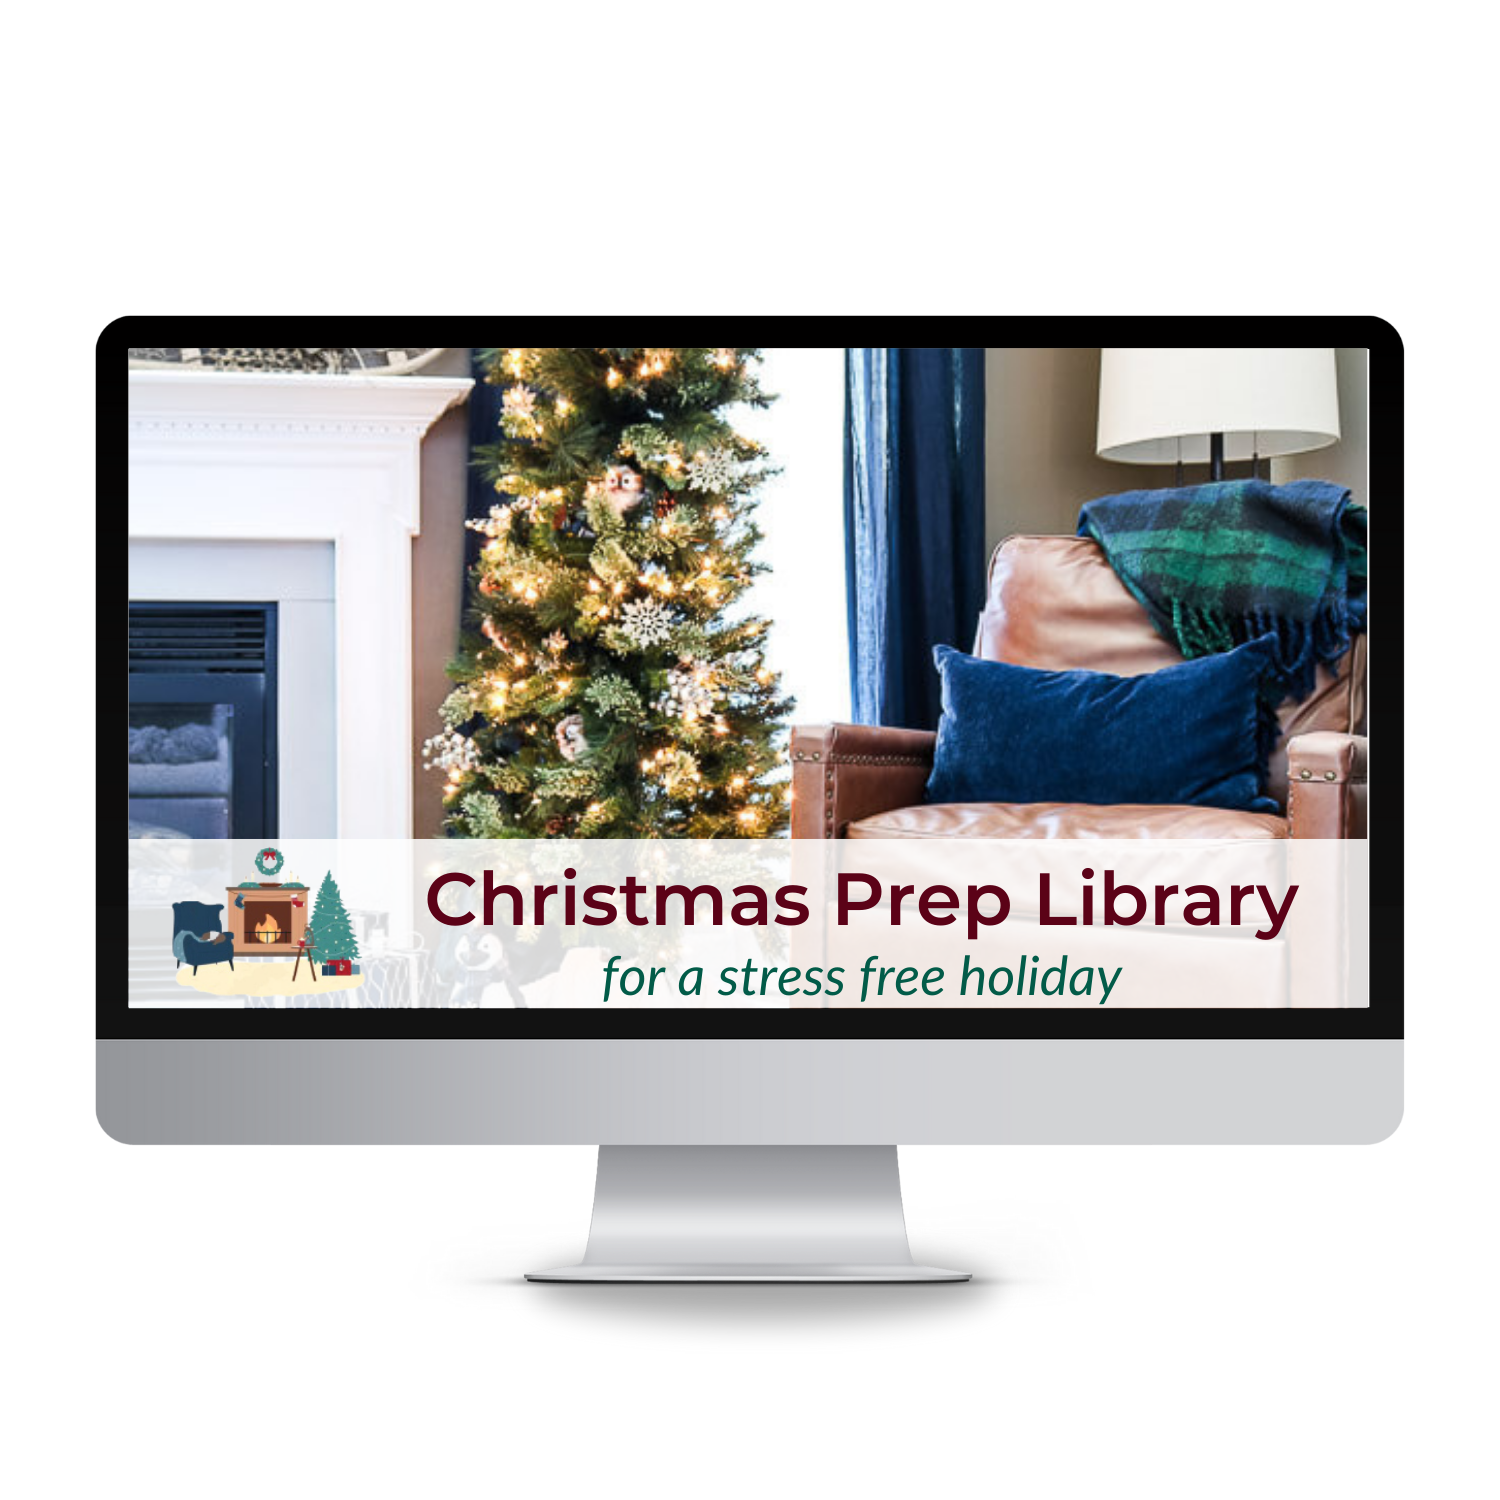 My Homier Home Christmas Prep Library for stress-free holiday hosting.